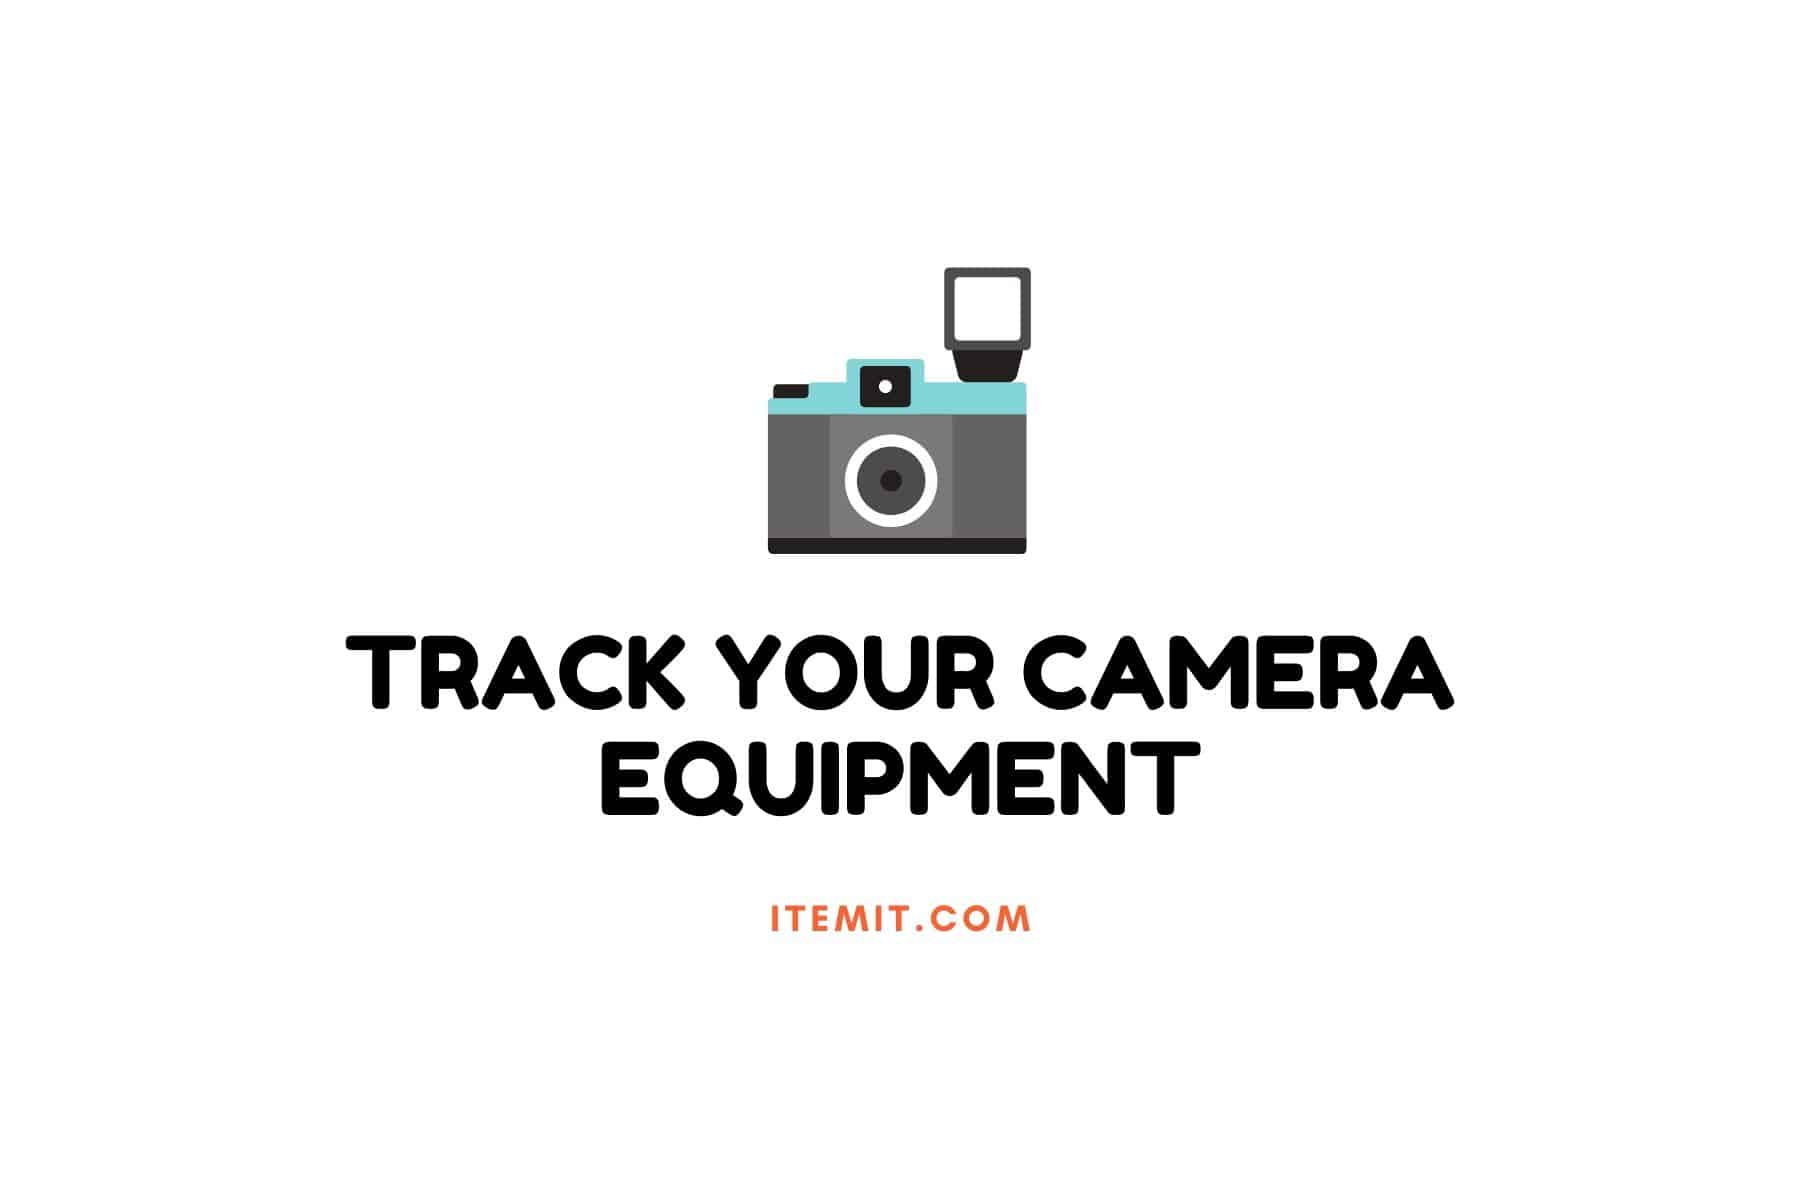 tracking camera equipment with asset tracking system